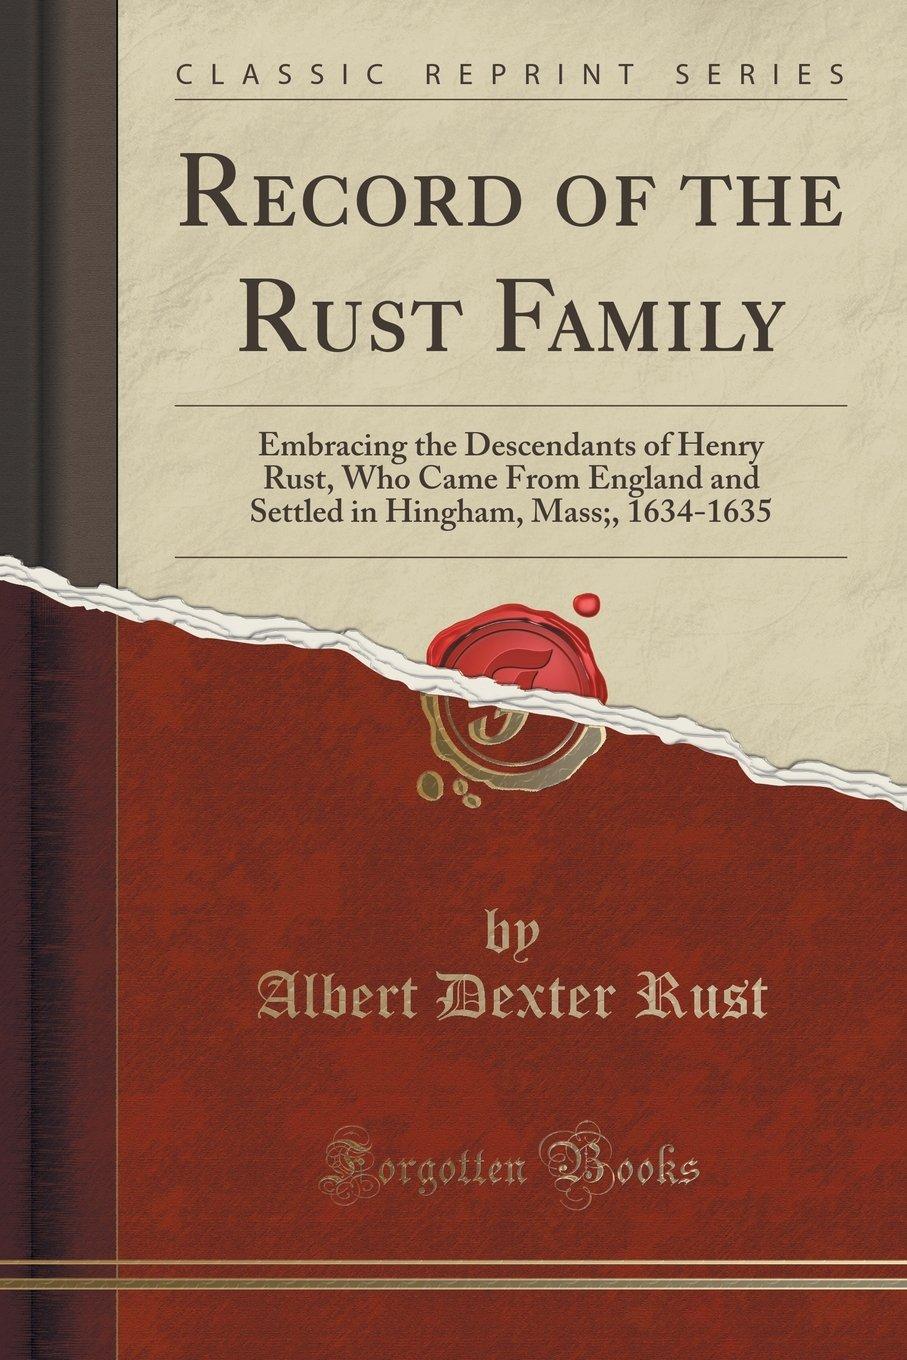 Here is an excerpt from Record of the Rust Family: Embracing the Descendants of Henry Rust, Who Came From England and Settled in Hingham, Mass.